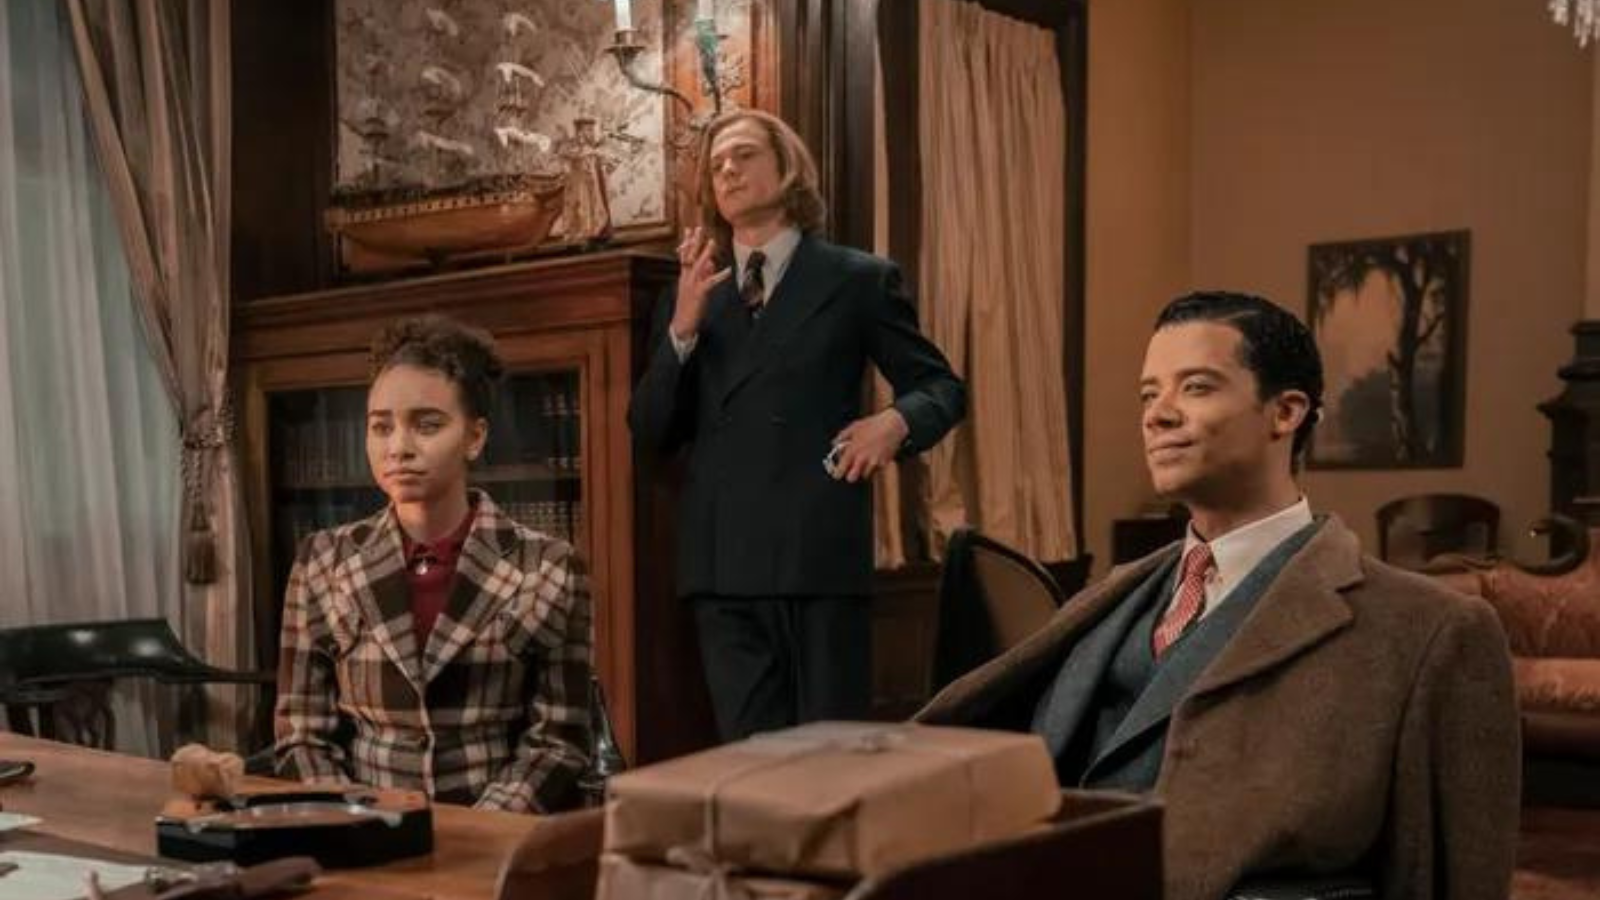 Claudia, Lestat, and Louis in a meeting. Claudia is in a plaid jacket, Lestat in a blue suit, Louis in a suit of differing blues and browns.